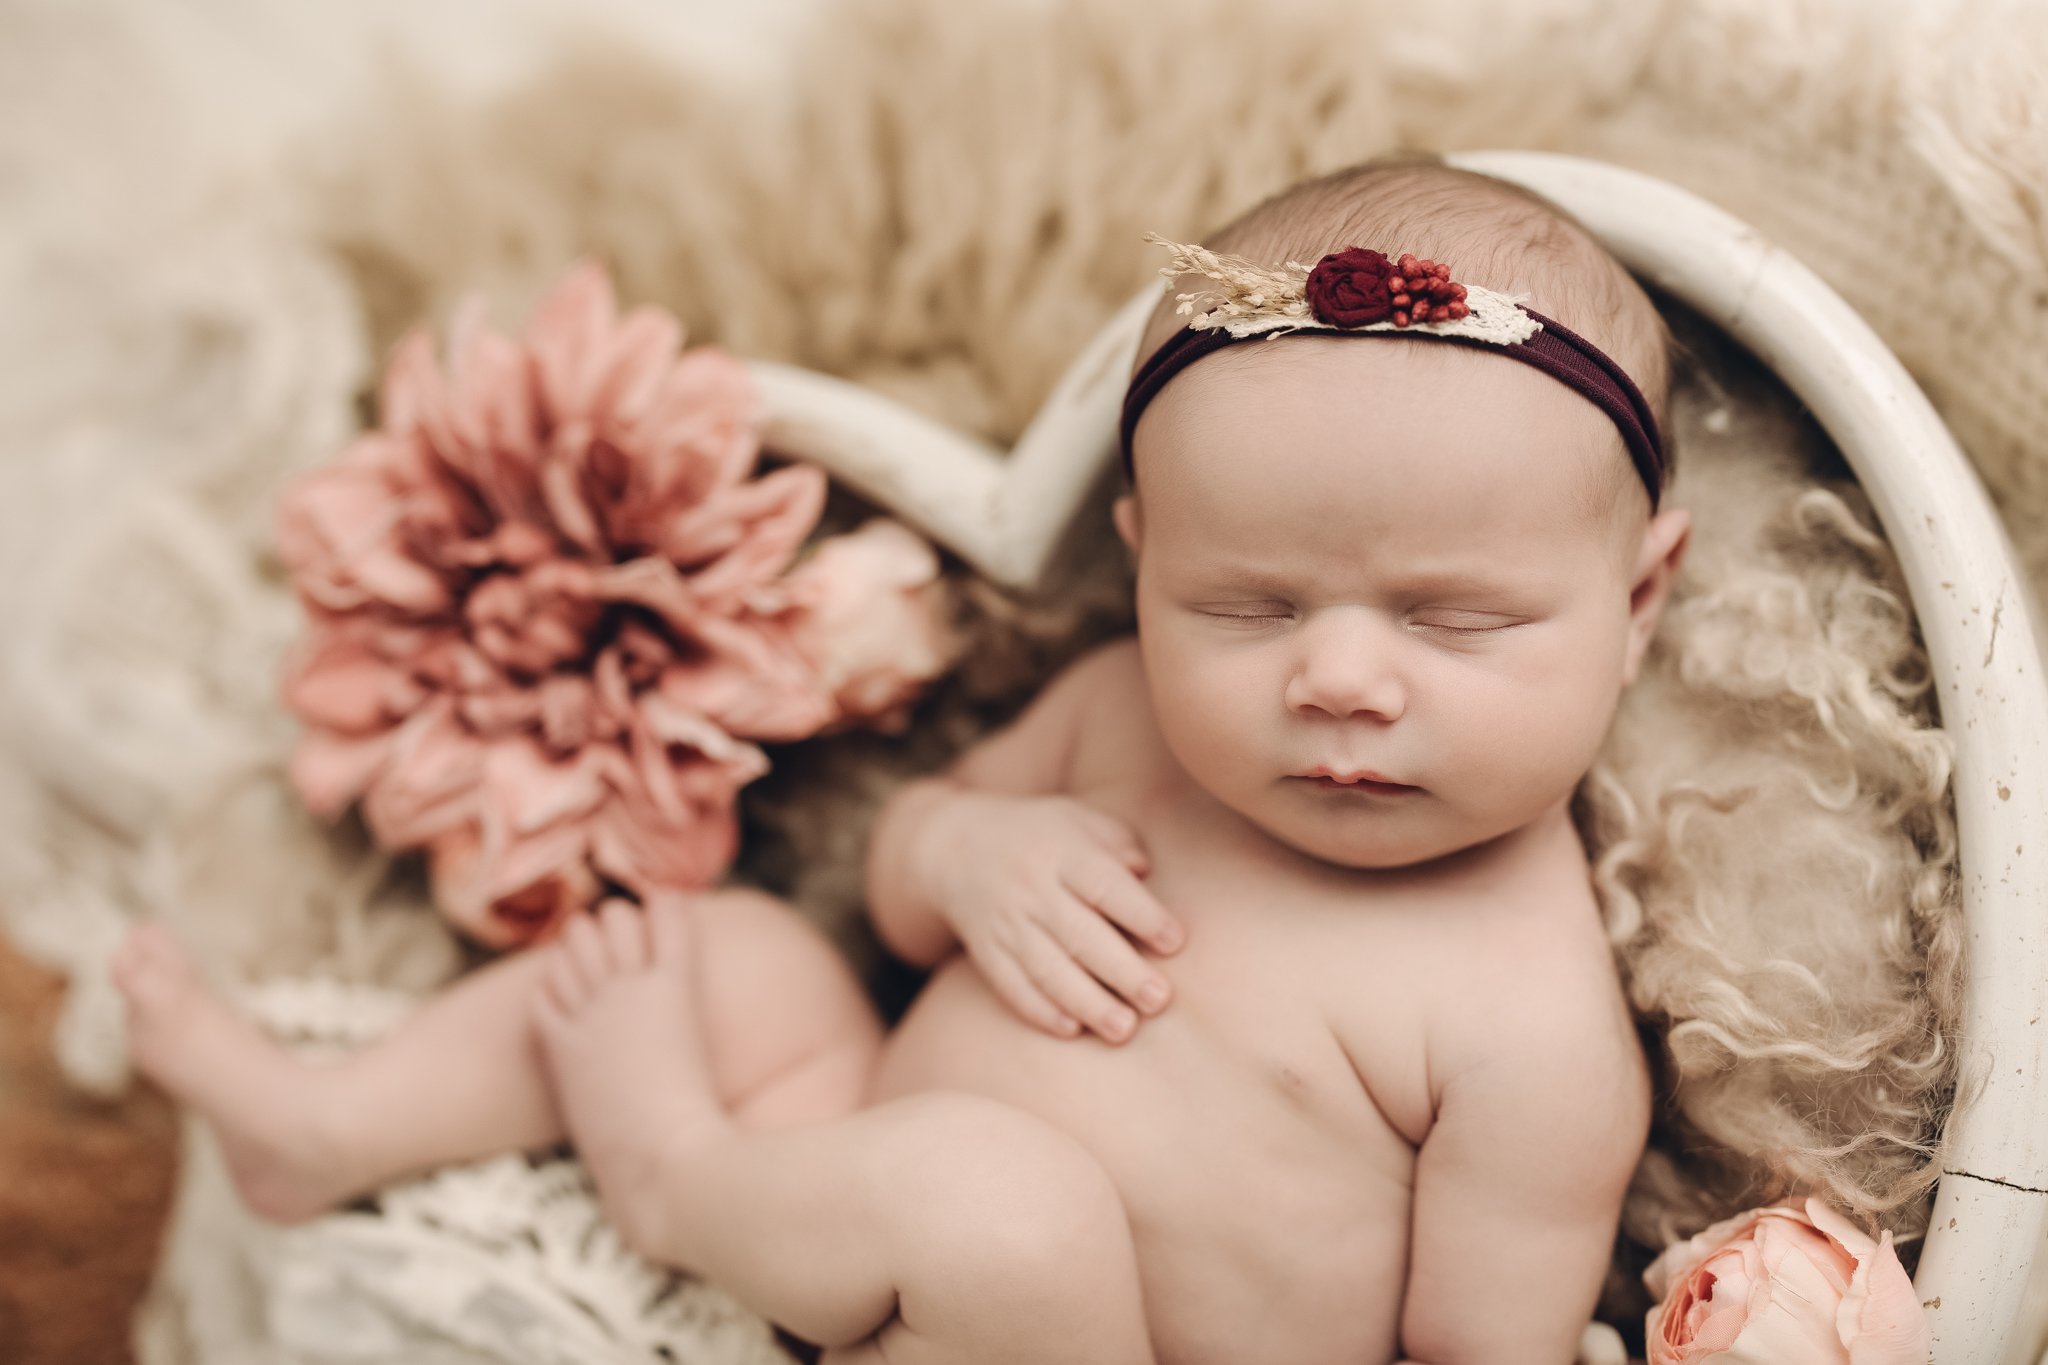 Posed_Studio_Newborn_Photographer_Second_Child_Siblings_Baby_Girl_Pink_Floral_by_Christie_Leigh_Photo_Champion_OH_Ohio_Trumbull_County-7.jpg